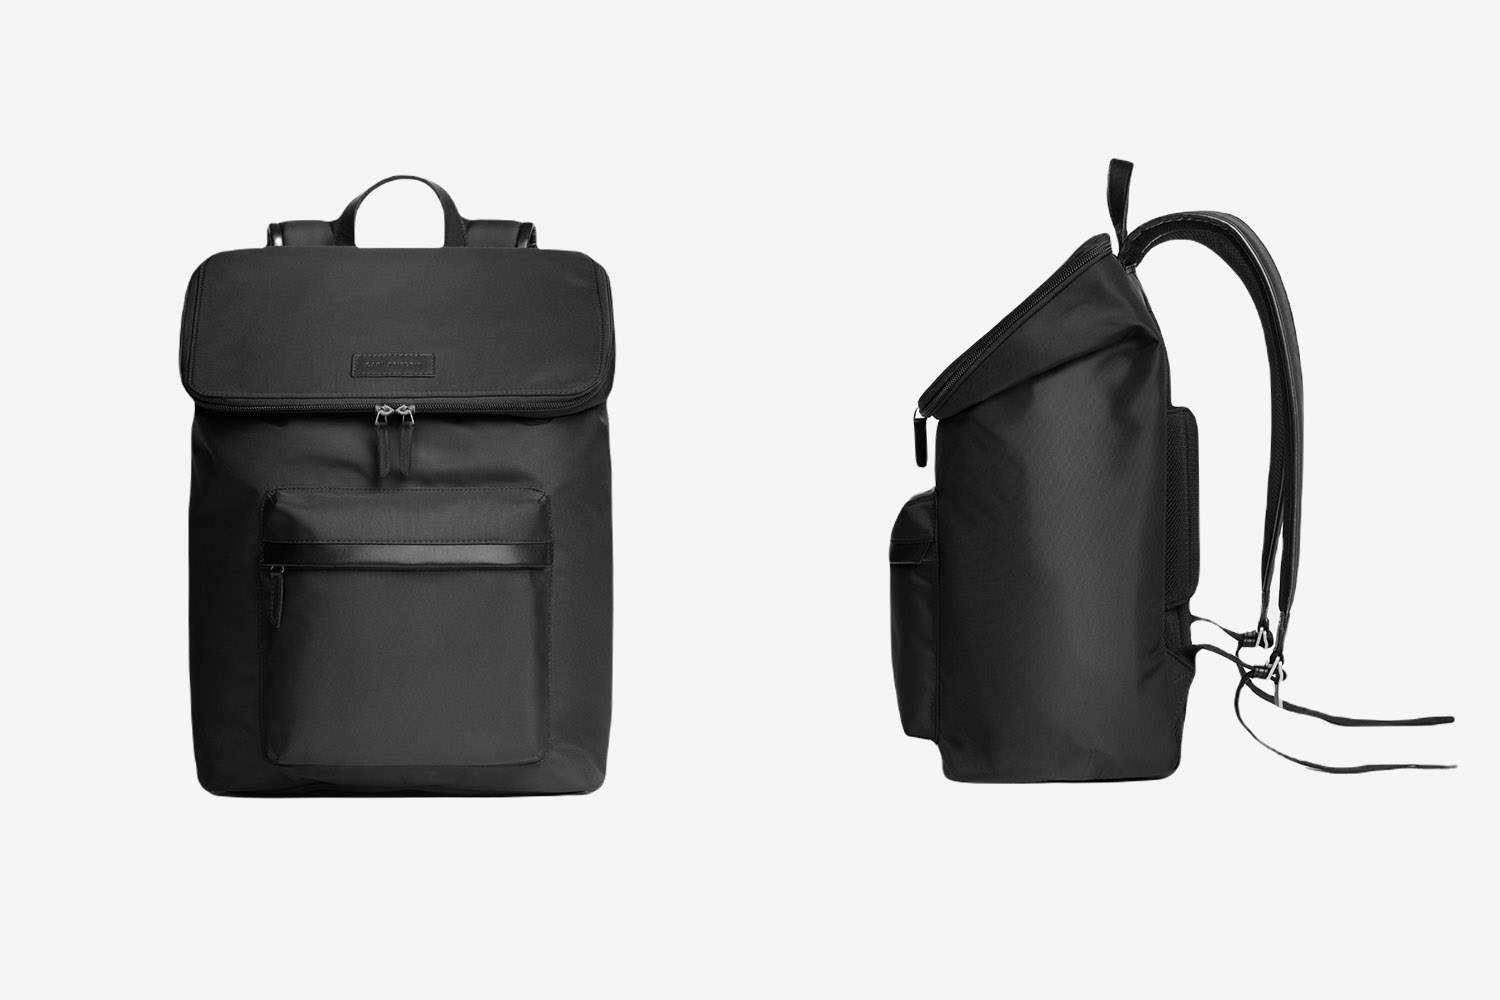 Front and side views of the Carl Friedrik Day-to-Day Backpack